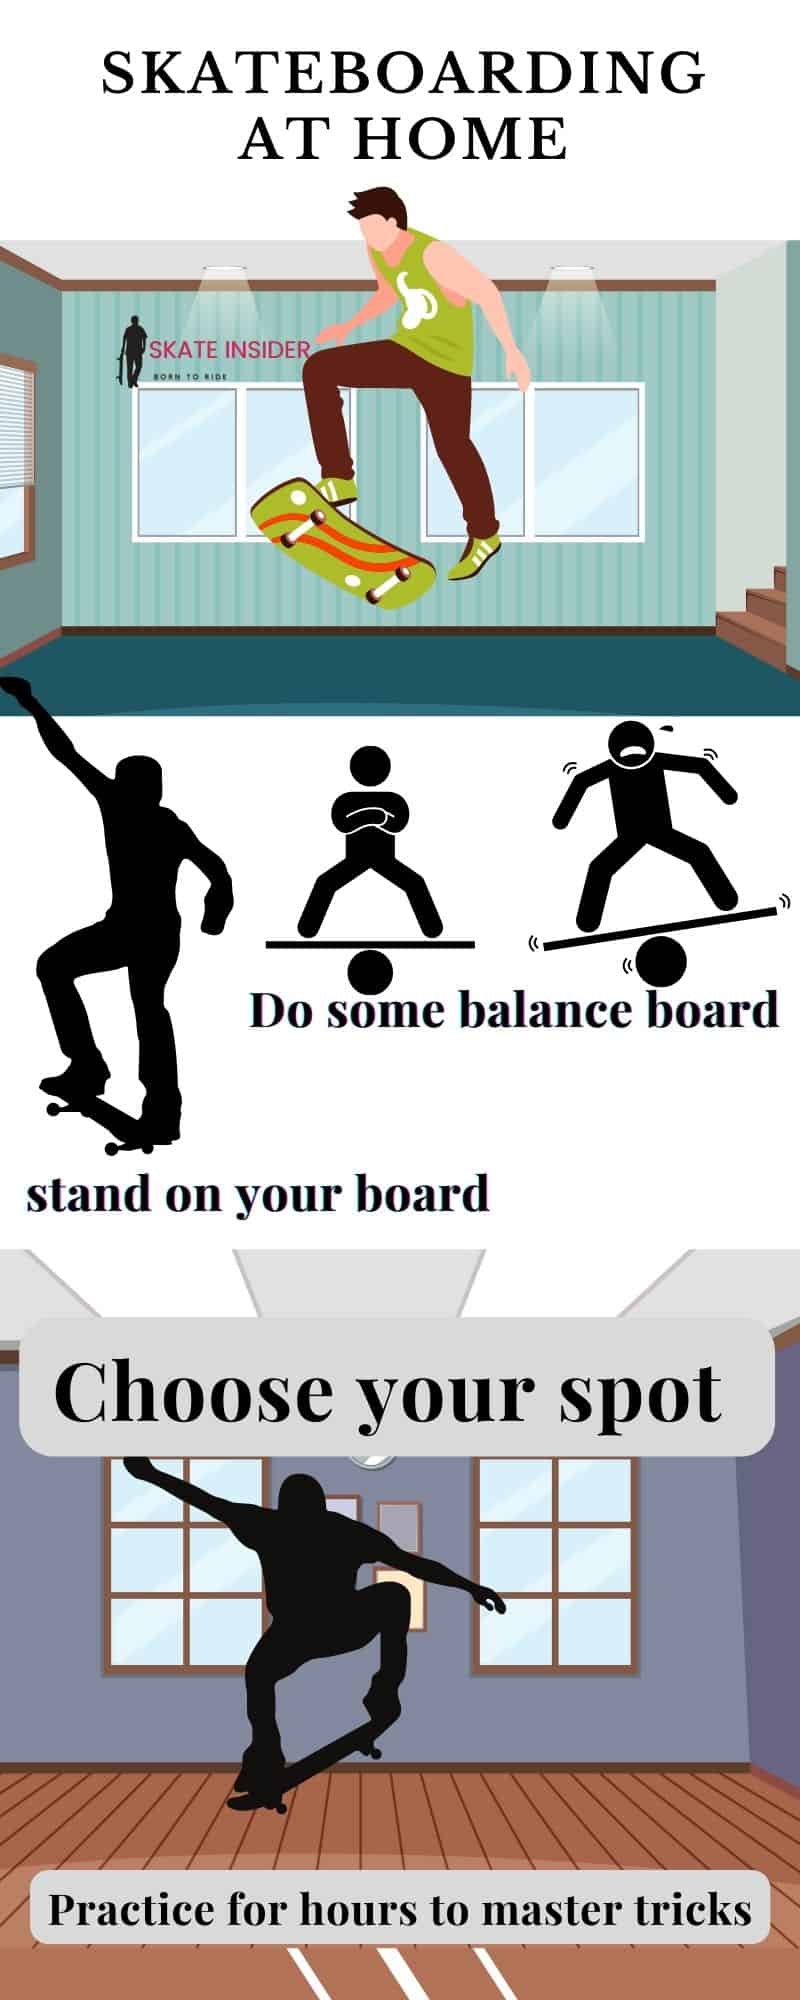 practice skateboarding at home infographic